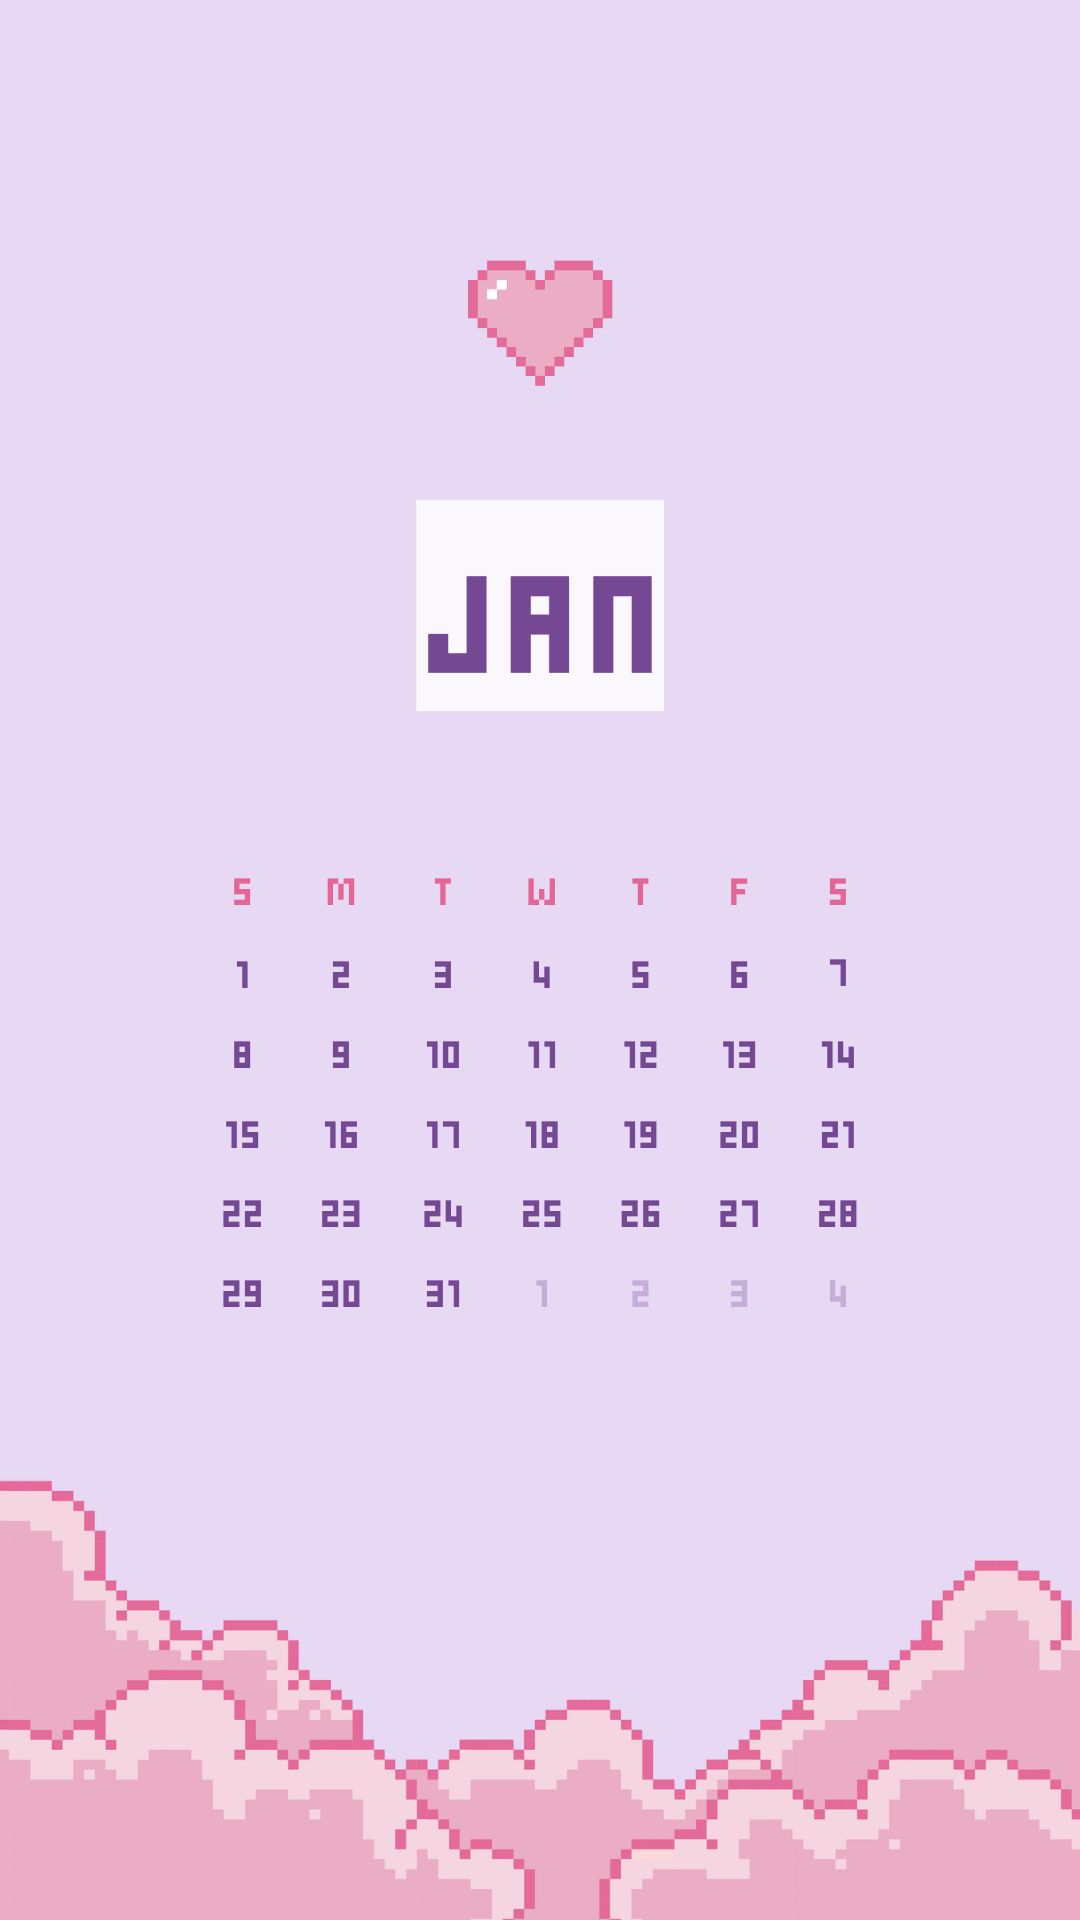 January 2023 free aesthetic calendar wallpapers / lock screen backgrounds for your phone ⋆ Aesthetic Design Shop